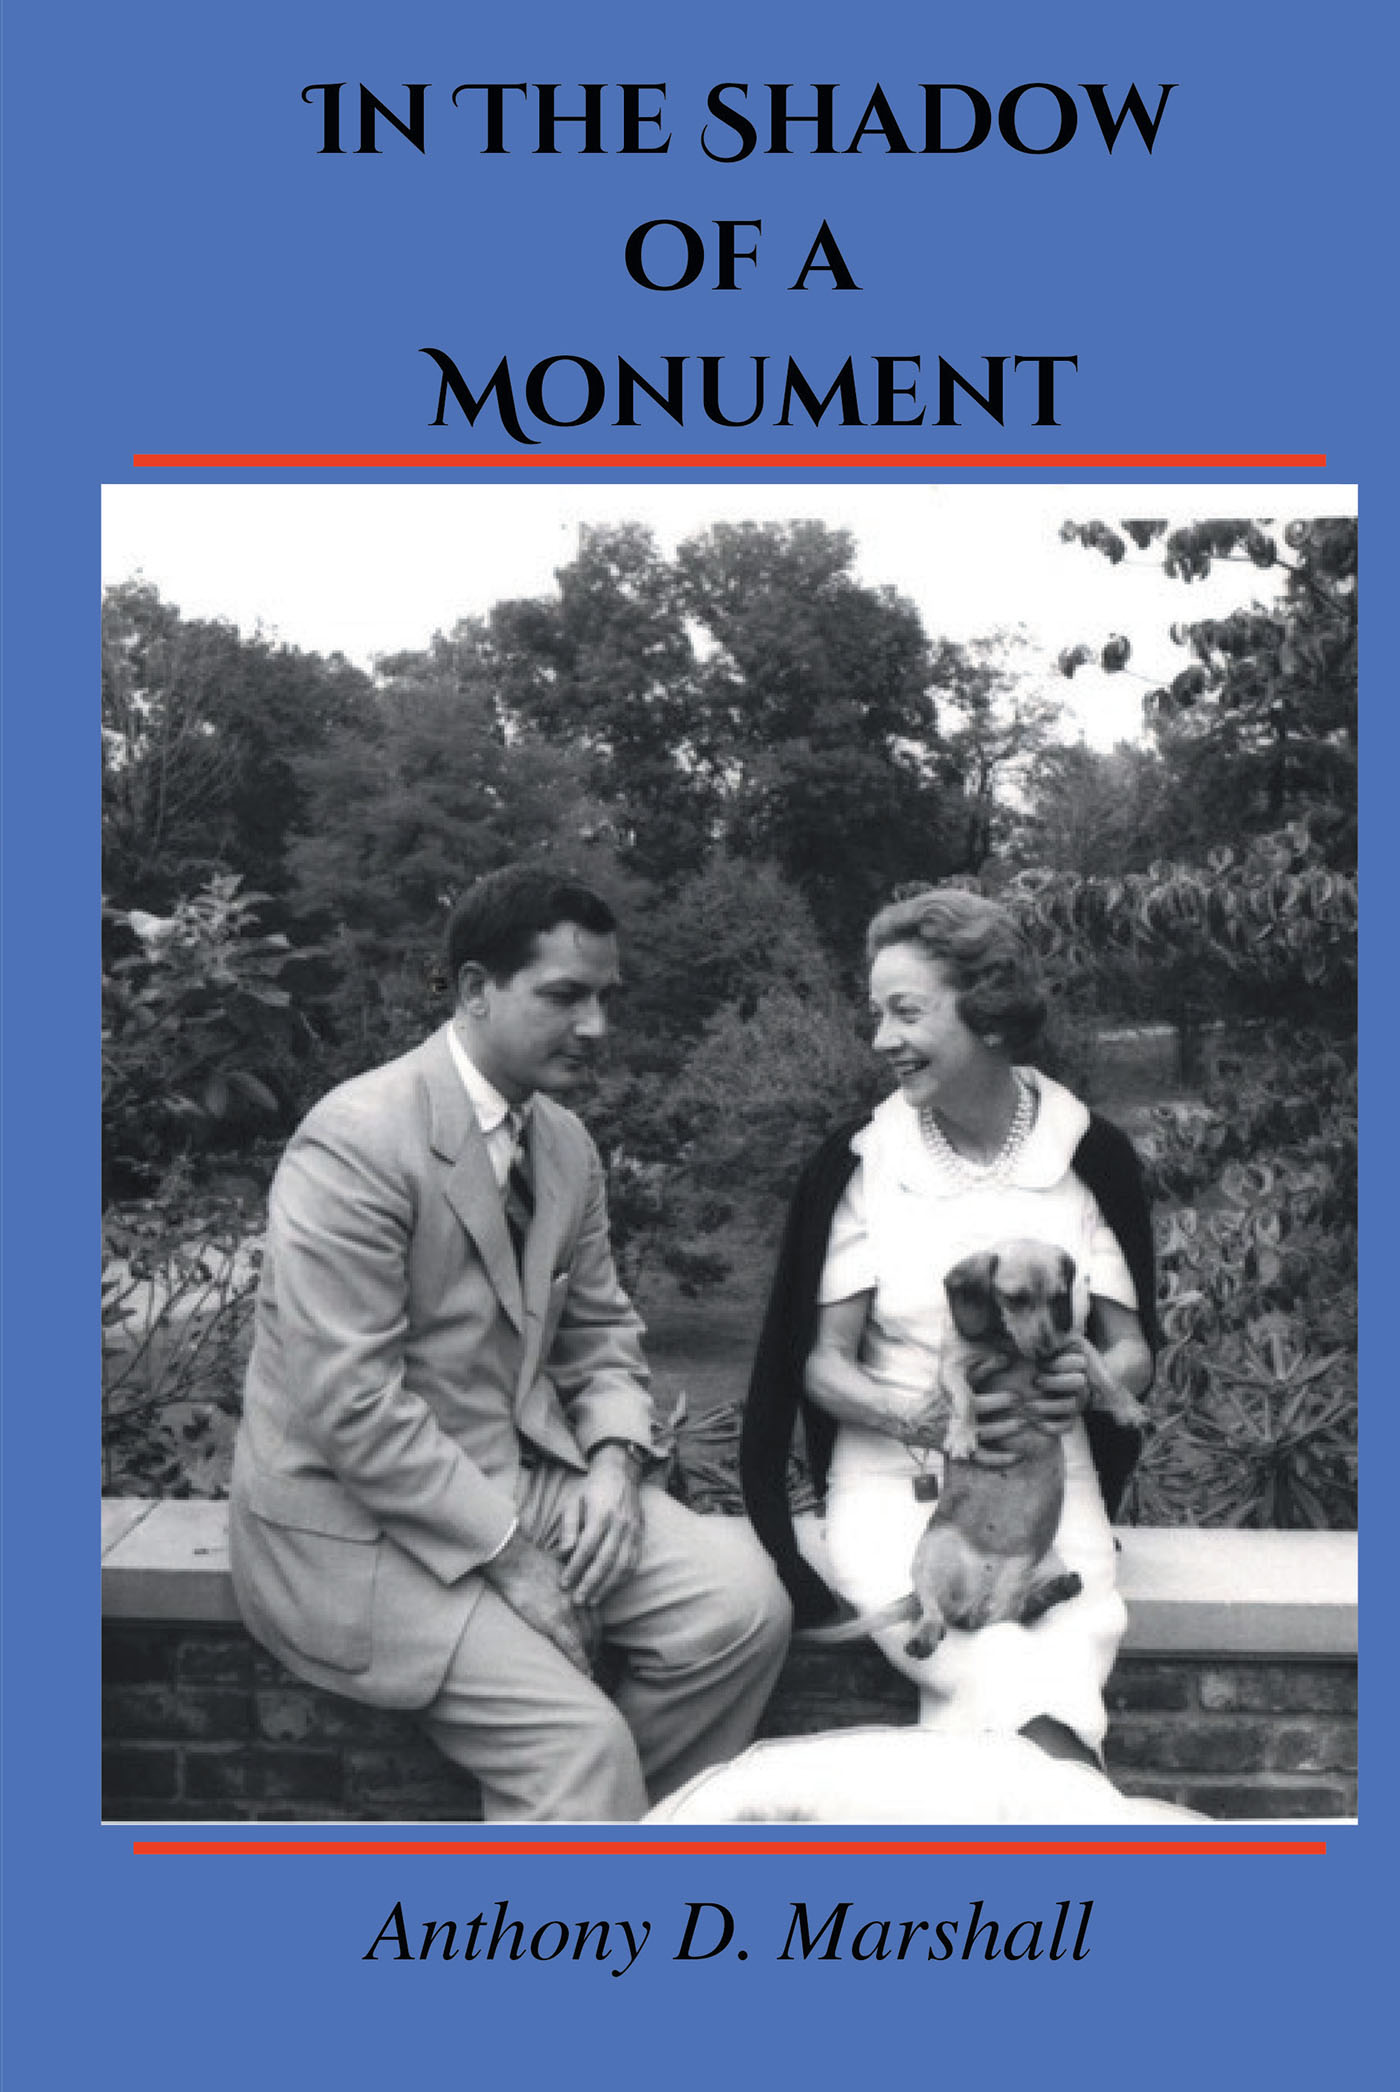 Author Anthony D. Marshall’s New Book, "In the Shadow of a Monument," is an Enthralling Memoir That Shares the Engrossing Life Story of the Author